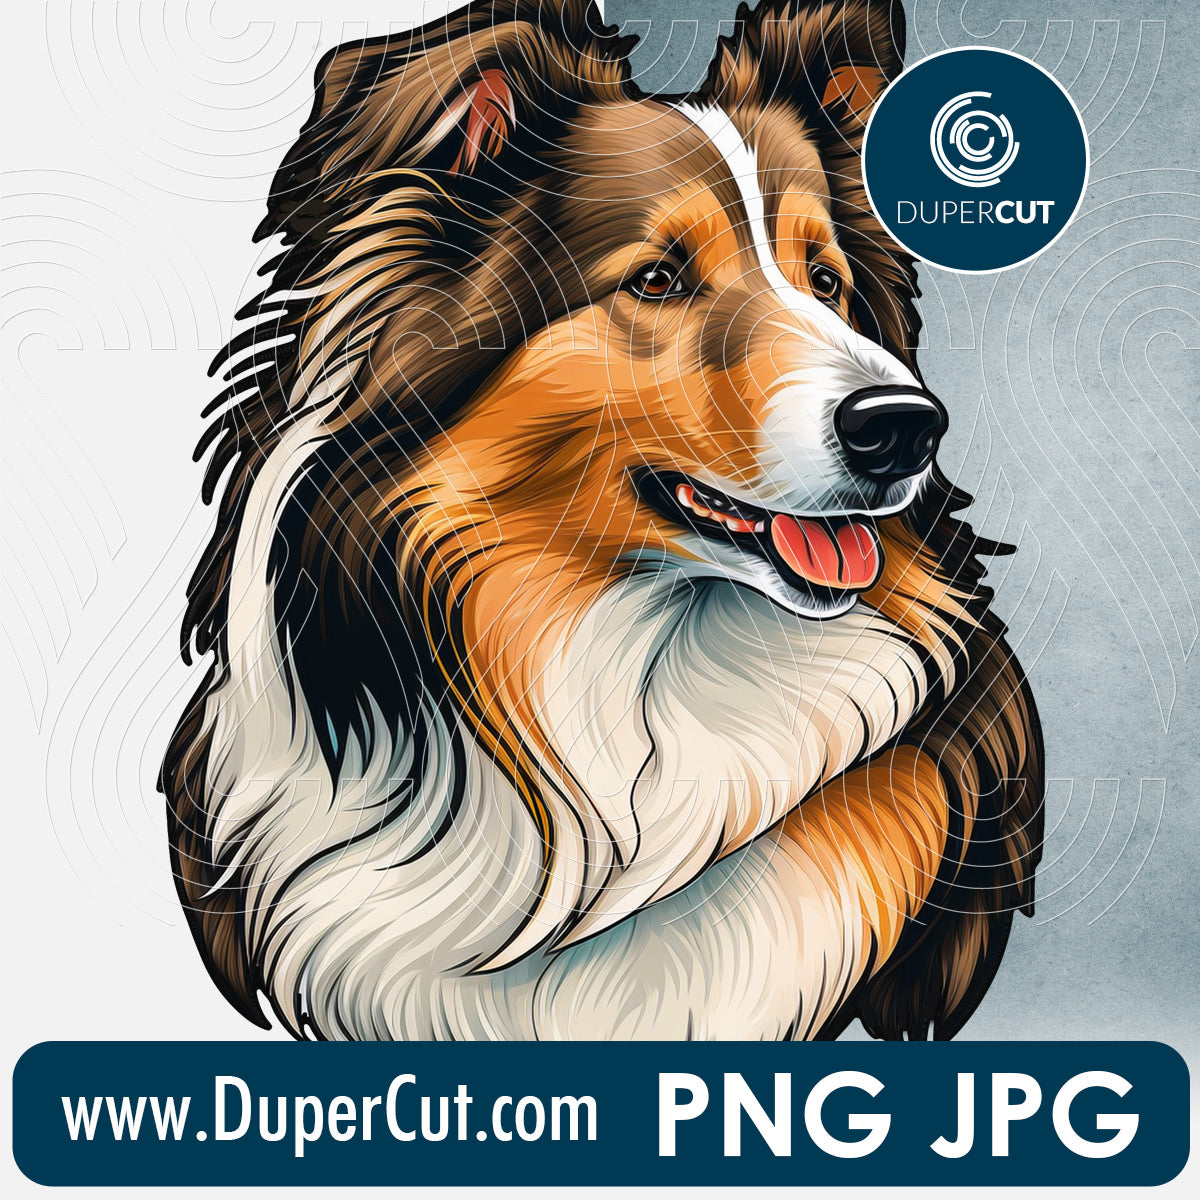 Collie dog breed - JPG PNG file transparent background, high res pattern for sublimation, print on demand by www.dupercut.com